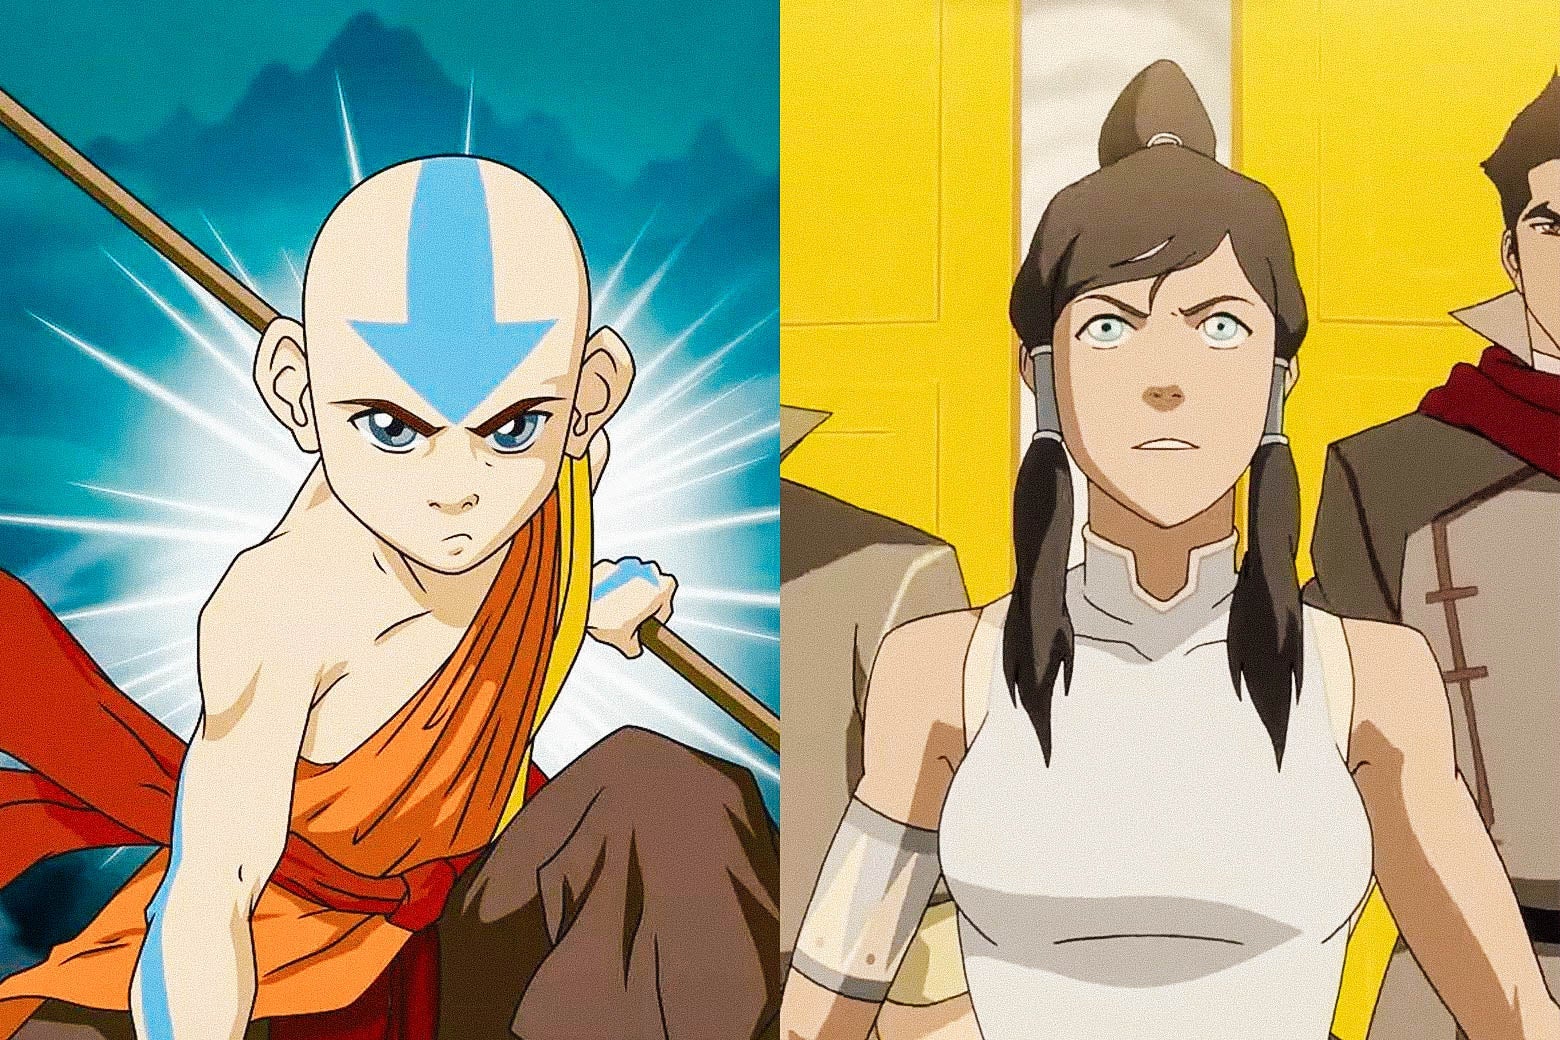 avatar-the-legend-of-korra-vs-the-last-airbender-which-animated-series-is-better